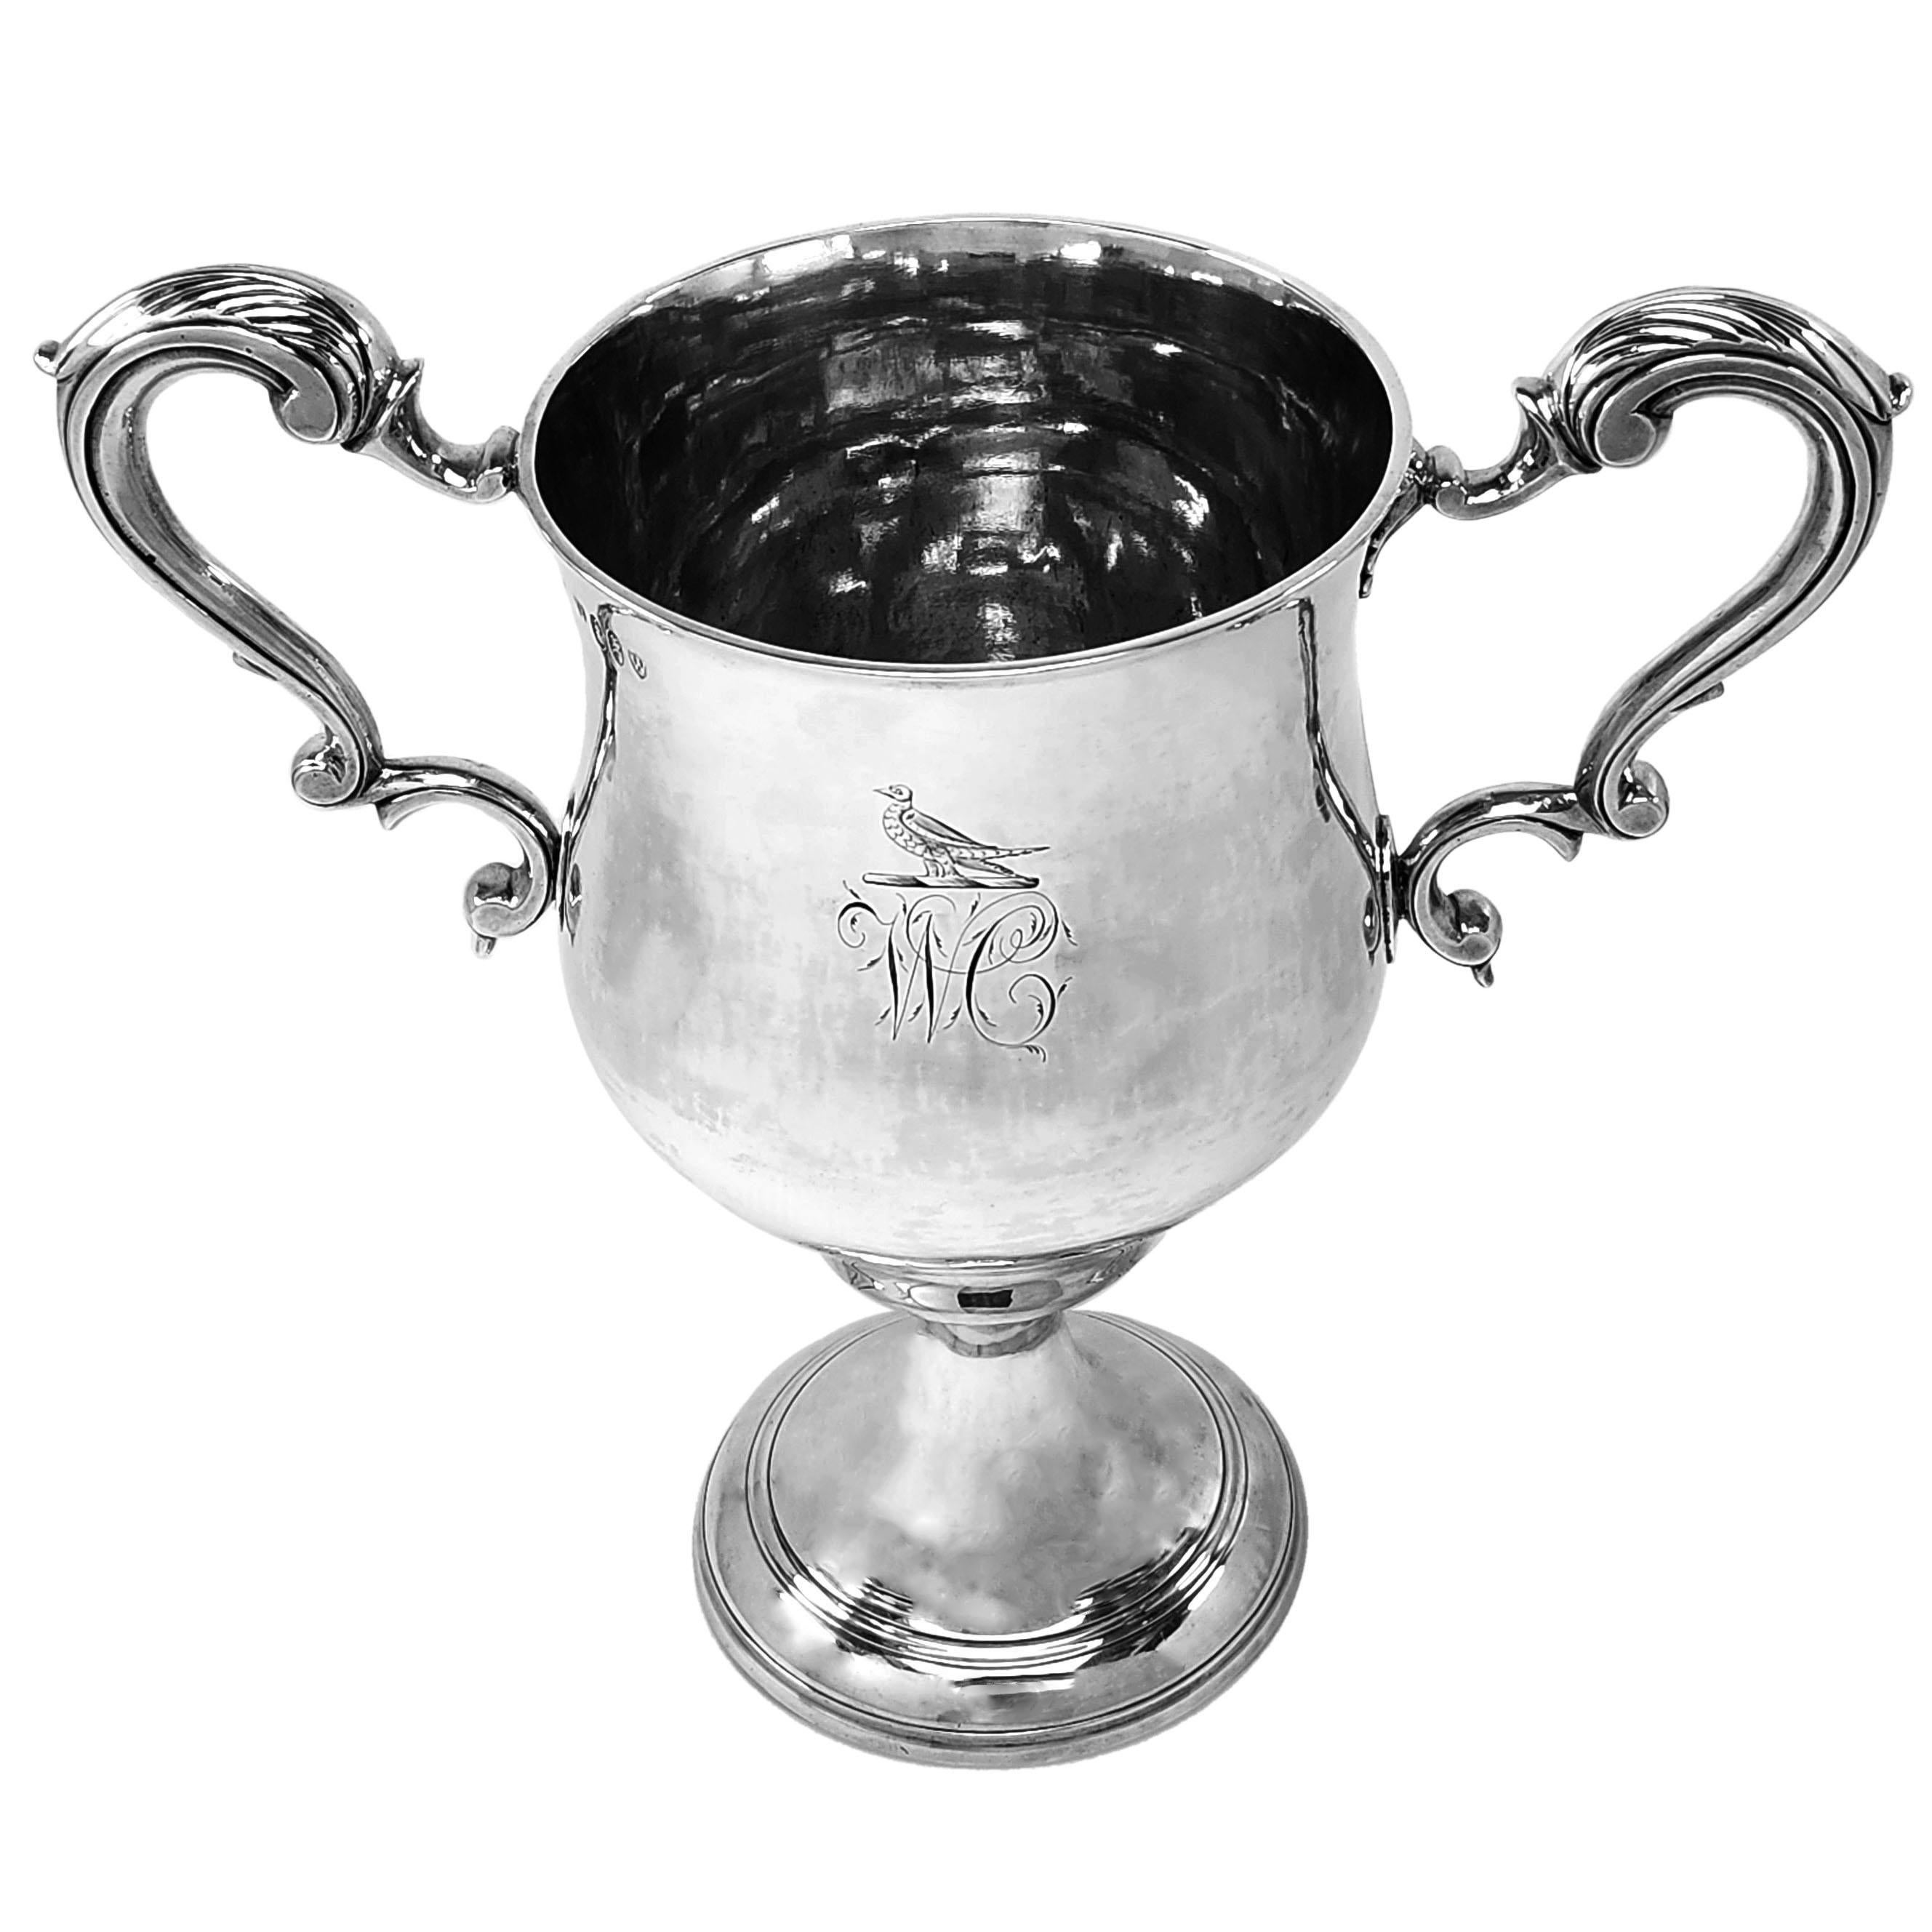 An elegant Antique Irish George III Silver Two Handled Cup. The Cup features an engraved armorial on the one side and a crest and monogram on the other. The Cup has a pair of acanthus leaf topped scroll handles.

Made in Dublin, Ireland in 1769 by